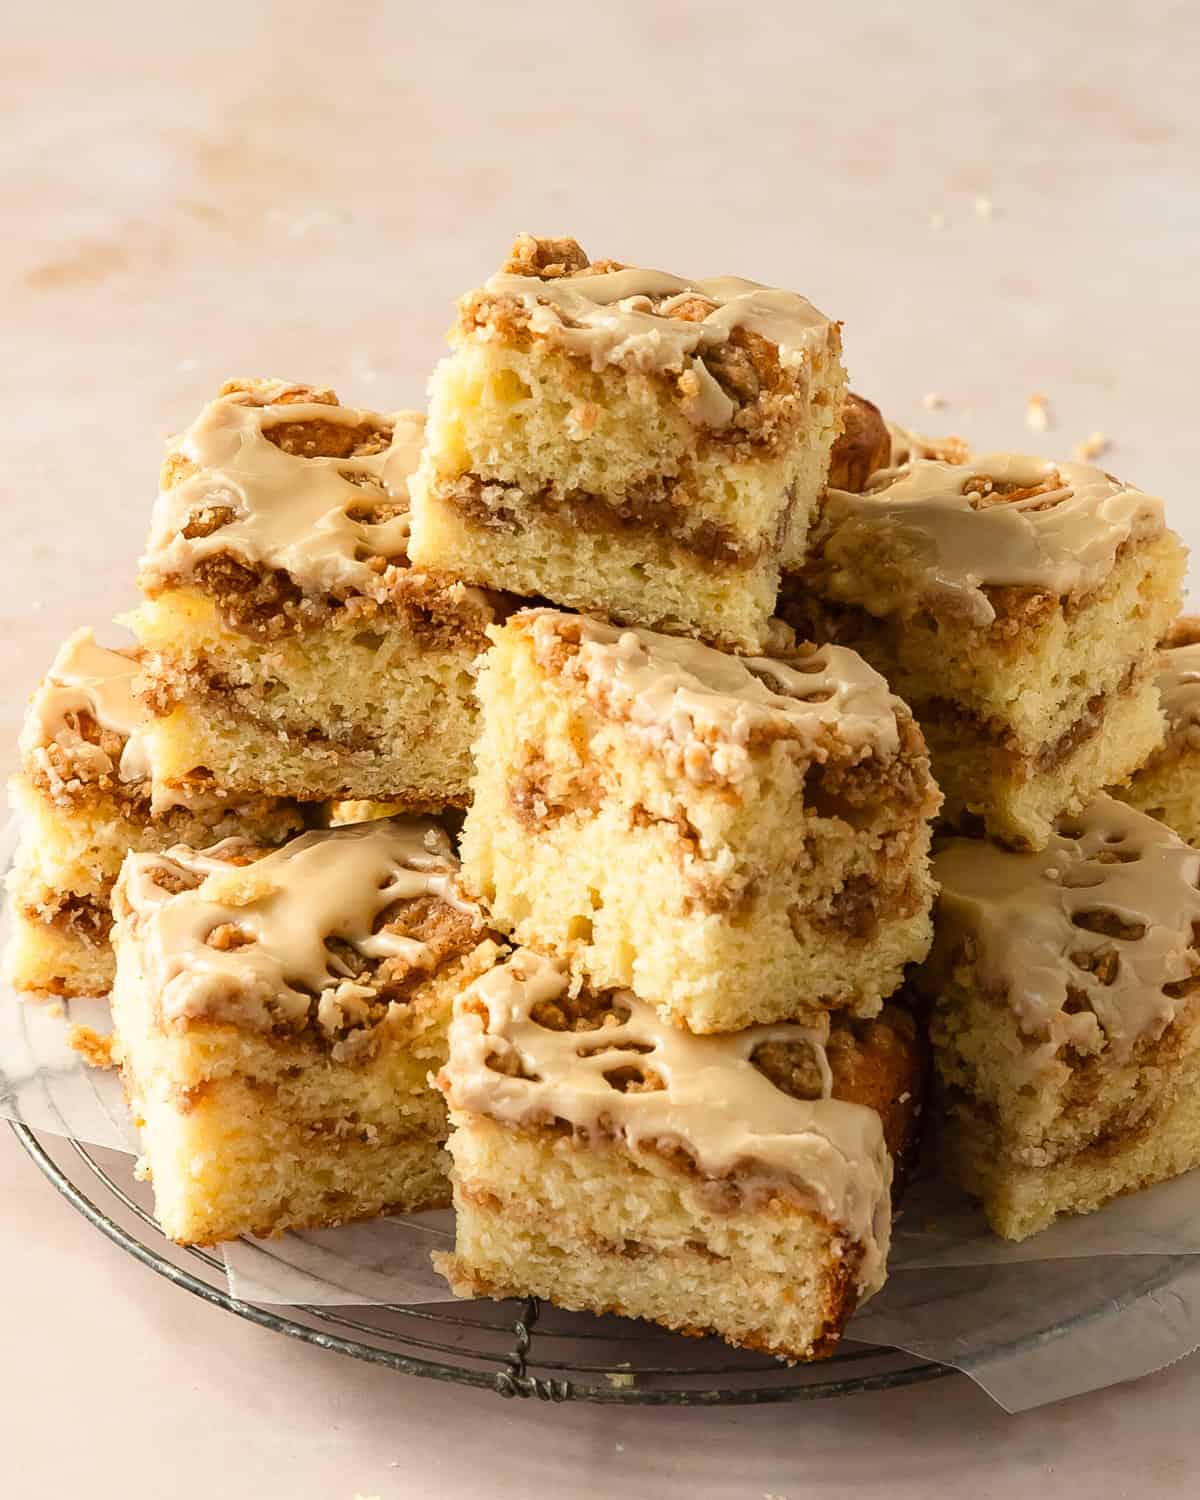 Buttermilk coffee cake is a soft, moist, fluffy and buttery vanilla cake layered with an easy cinnamon streusel. This coffee cake with buttermilk is topped with the same cinnamon streusel and  creamy vanilla glaze. Make this cinnamon streusel coffee cake for a cozy breakfast, brunch or dessert. 